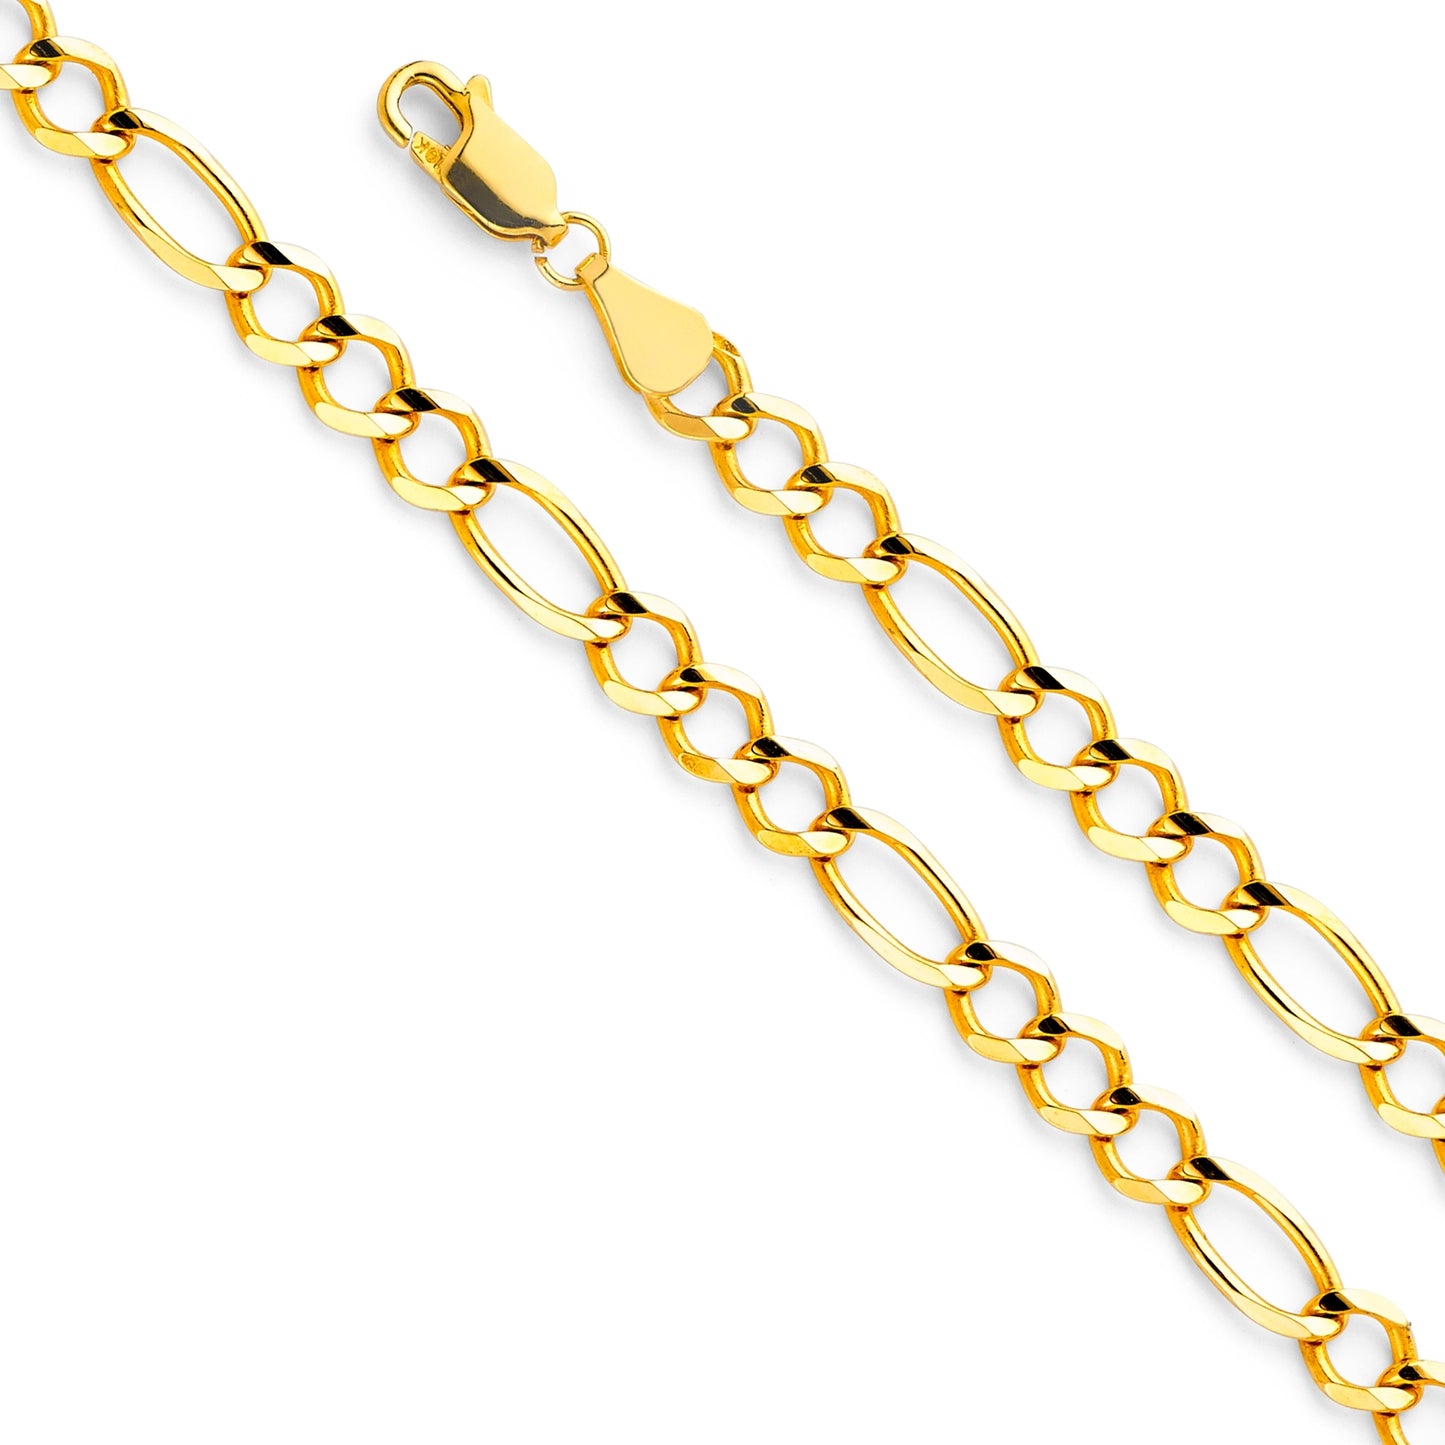 14K Solid Yellow Gold Open Figaro Bracelet 6.2mm thick 8 Inches.  Made in Italy